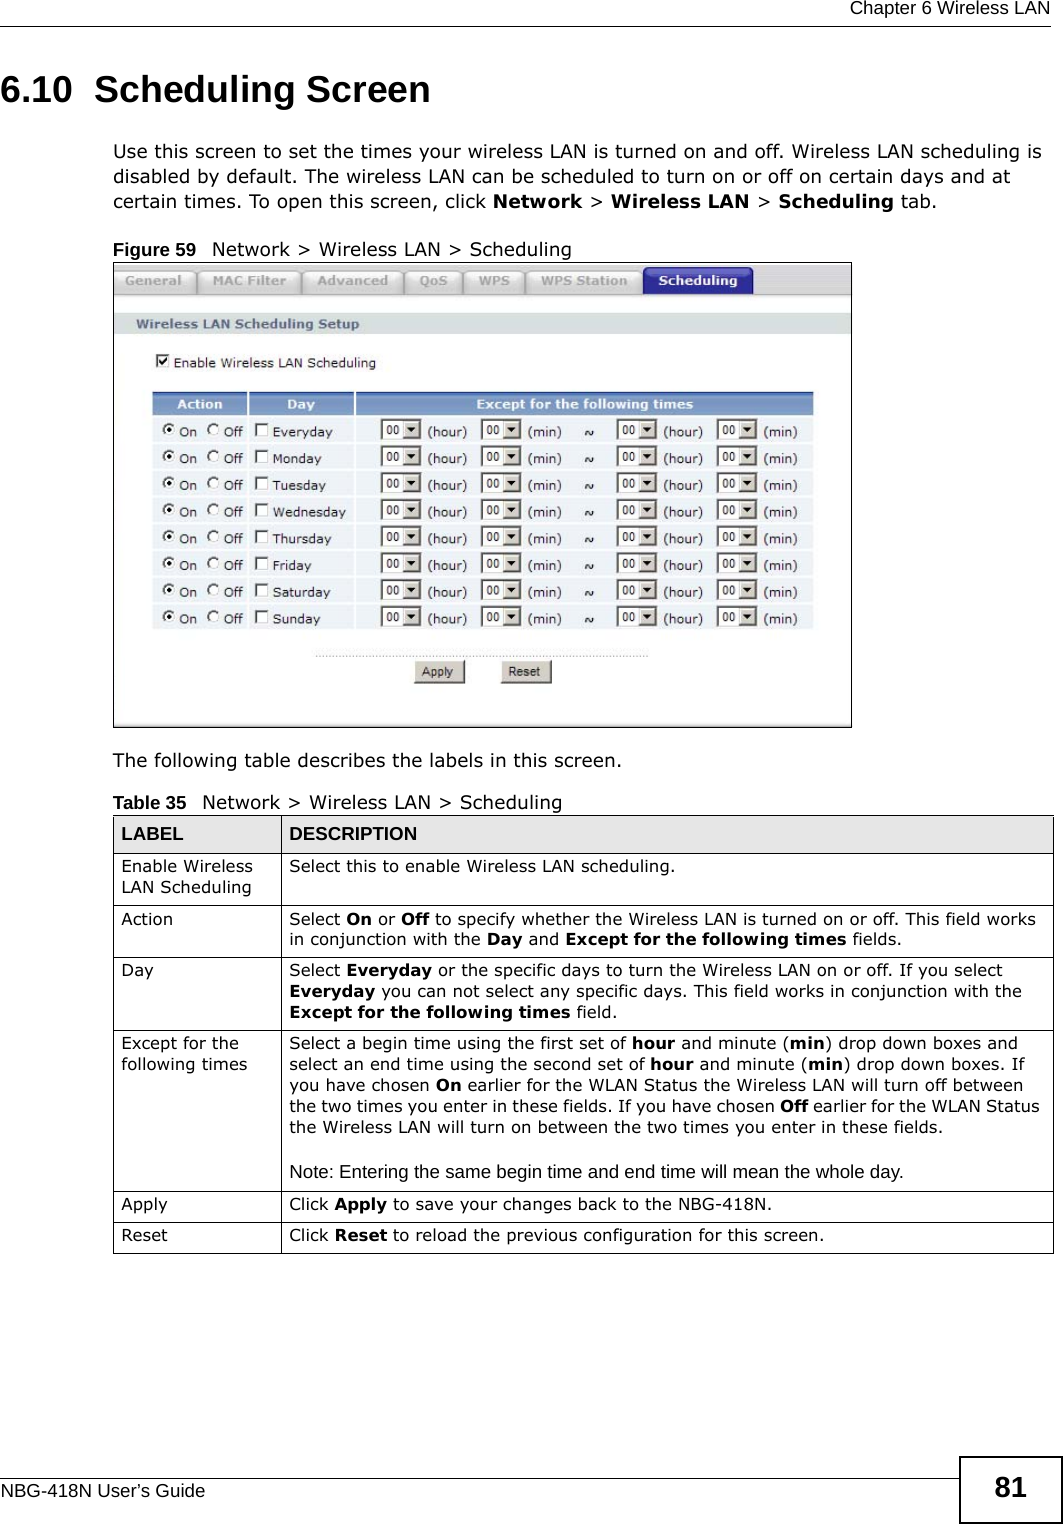  Chapter 6 Wireless LANNBG-418N User’s Guide 816.10  Scheduling ScreenUse this screen to set the times your wireless LAN is turned on and off. Wireless LAN scheduling is disabled by default. The wireless LAN can be scheduled to turn on or off on certain days and at certain times. To open this screen, click Network &gt; Wireless LAN &gt; Scheduling tab.Figure 59   Network &gt; Wireless LAN &gt; SchedulingThe following table describes the labels in this screen.Table 35   Network &gt; Wireless LAN &gt; SchedulingLABEL DESCRIPTIONEnable Wireless LAN SchedulingSelect this to enable Wireless LAN scheduling.Action Select On or Off to specify whether the Wireless LAN is turned on or off. This field works in conjunction with the Day and Except for the following times fields.Day Select Everyday or the specific days to turn the Wireless LAN on or off. If you select Everyday you can not select any specific days. This field works in conjunction with the Except for the following times field.Except for the following times Select a begin time using the first set of hour and minute (min) drop down boxes and select an end time using the second set of hour and minute (min) drop down boxes. If you have chosen On earlier for the WLAN Status the Wireless LAN will turn off between the two times you enter in these fields. If you have chosen Off earlier for the WLAN Status the Wireless LAN will turn on between the two times you enter in these fields. Note: Entering the same begin time and end time will mean the whole day.Apply Click Apply to save your changes back to the NBG-418N.Reset Click Reset to reload the previous configuration for this screen.